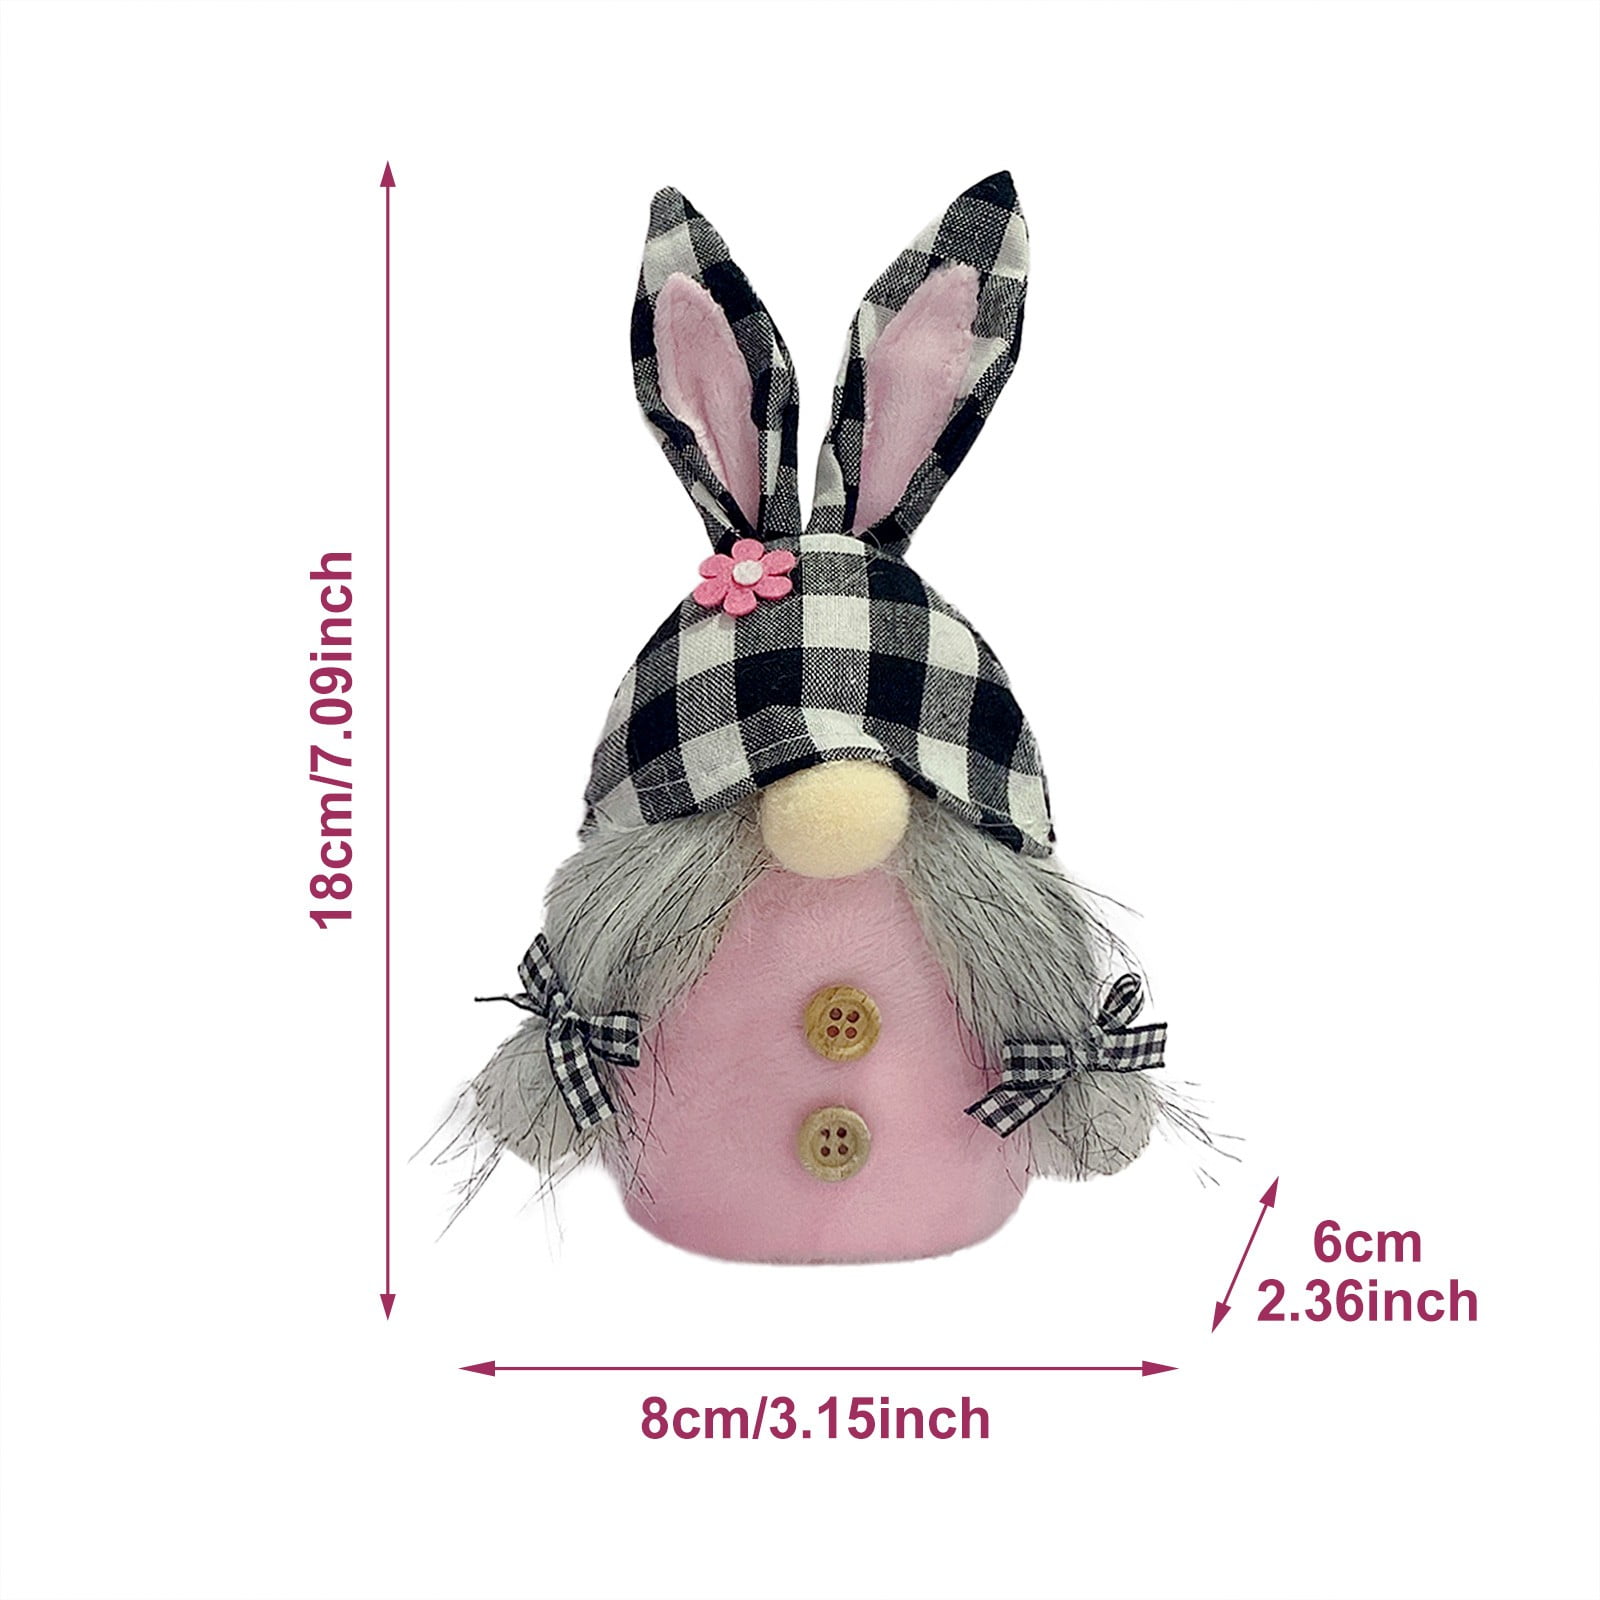 Details about   Way To Celebrate Easter Bunny Rabbit 13" Pink Soft Stuffed Plush Animal 